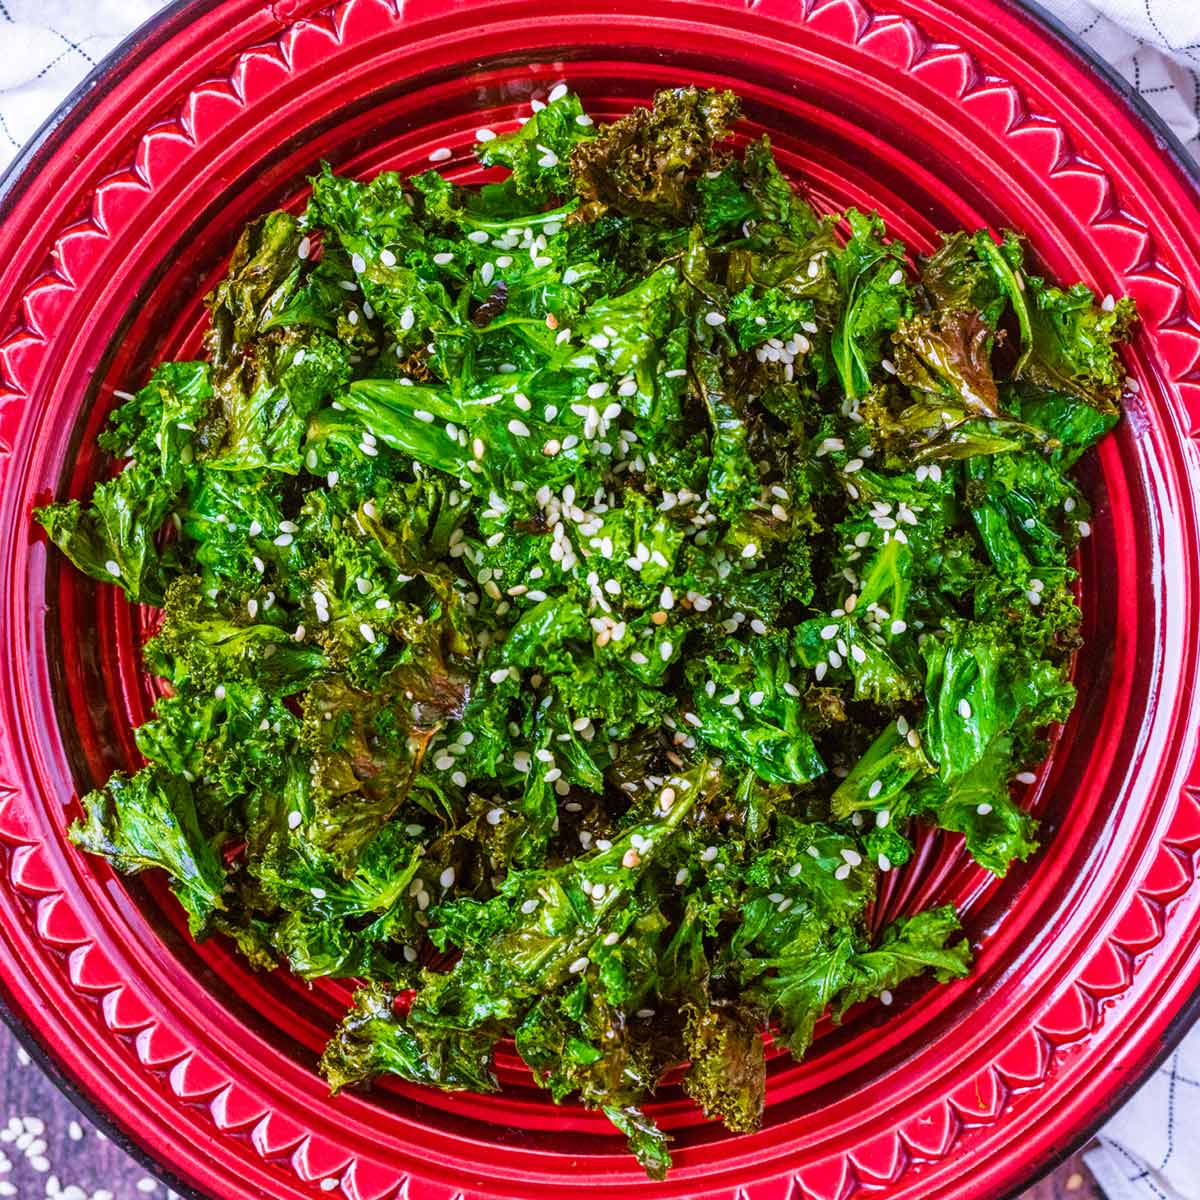 https://hungryhealthyhappy.com/wp-content/uploads/2023/02/air-fryer-kale-featured.jpg